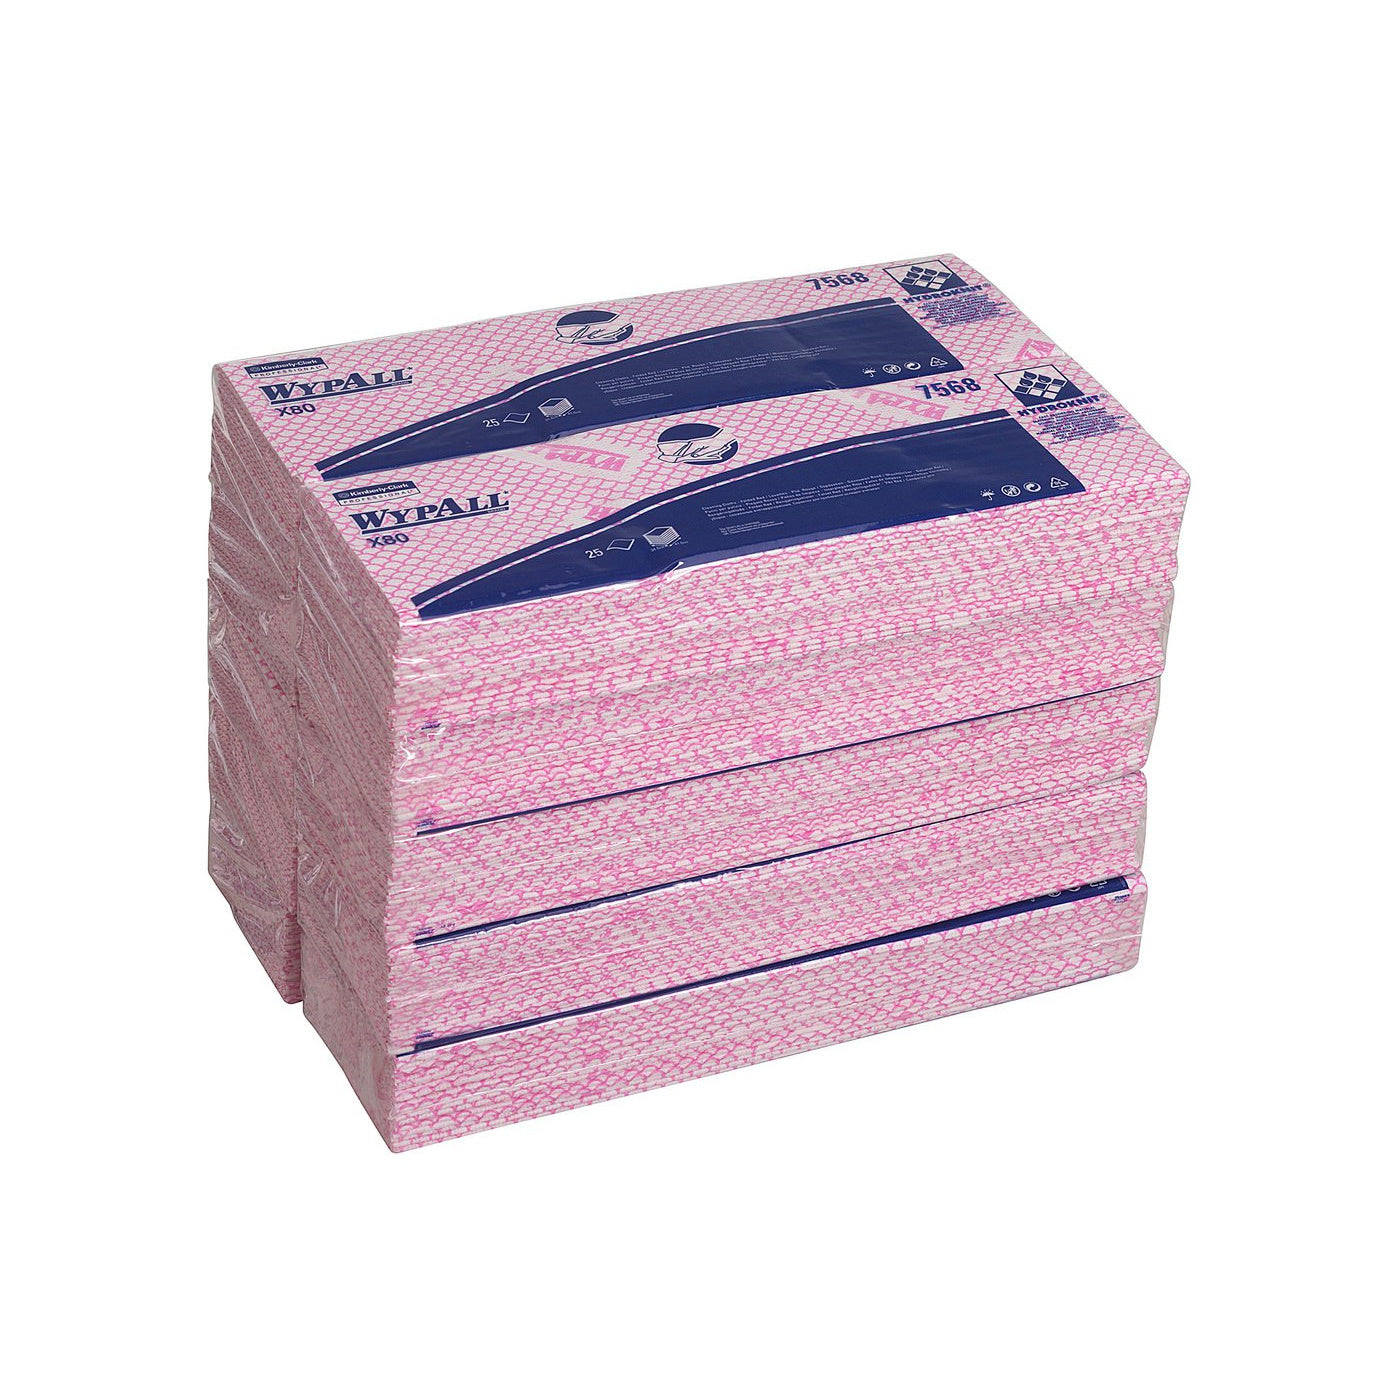 WypAll Cleaning Cloths - Interfolded / Pink (10 Packs of 25) - Code 7568